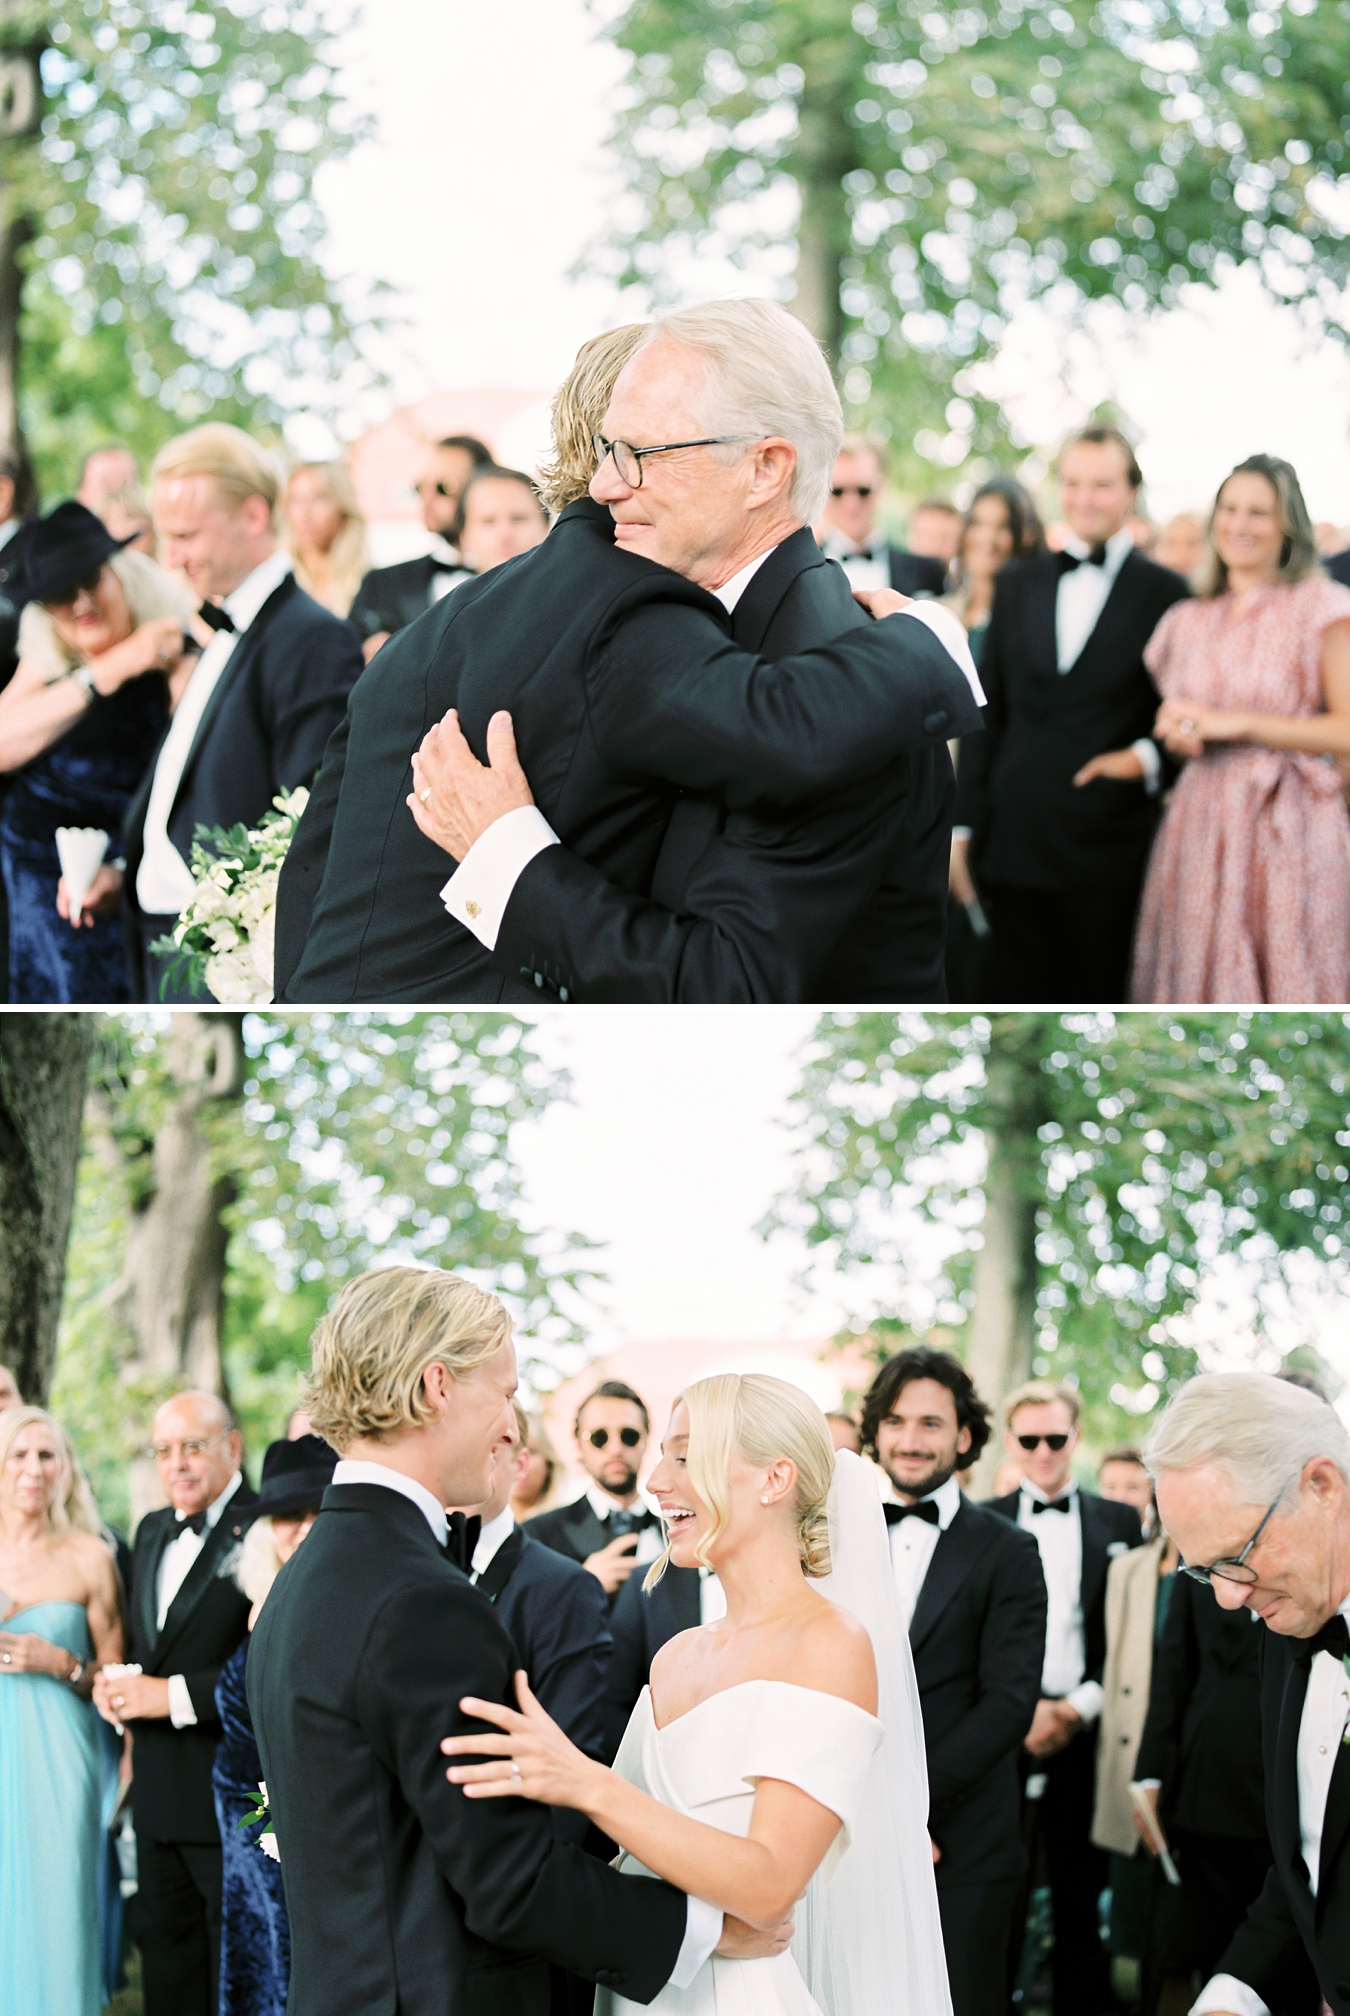 the groom hugging his father in law during the wedding ceremony